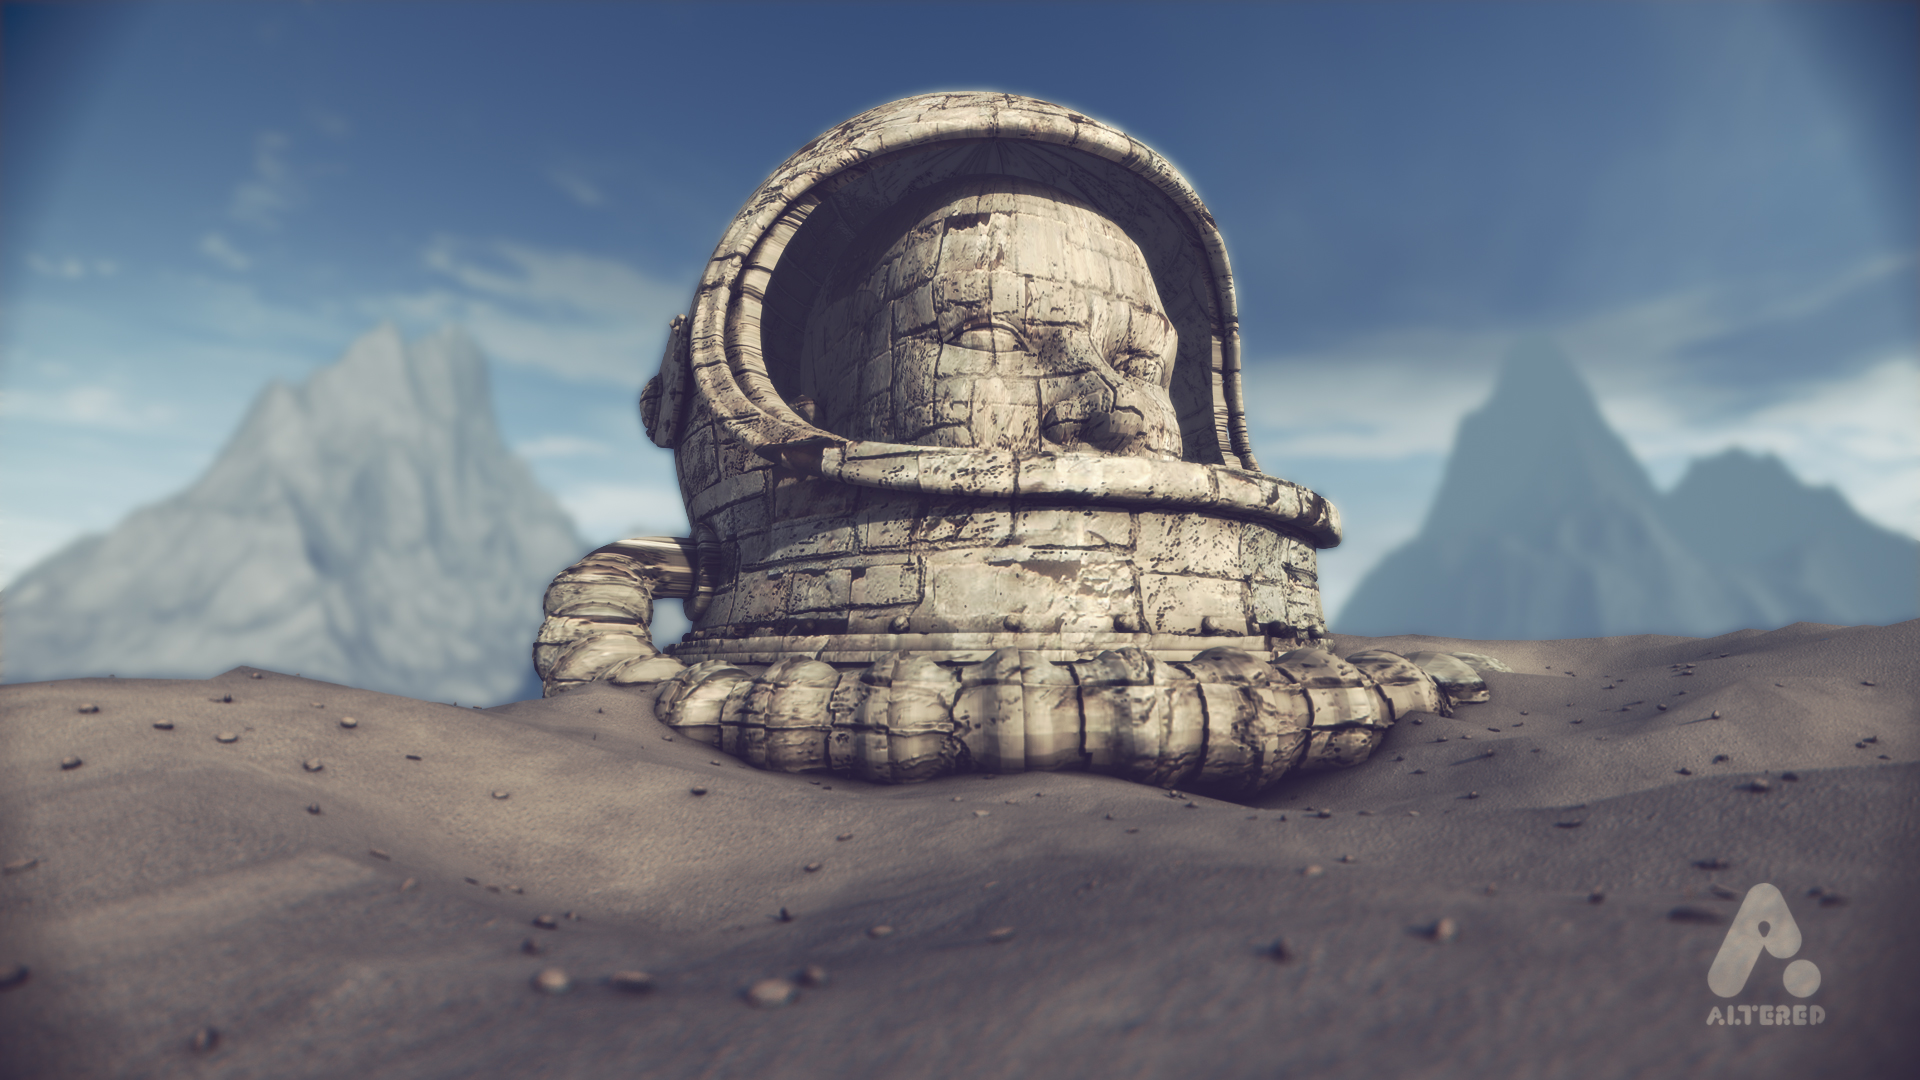 CG, 3D rendered image of Alien planet with stone head of a spaceman, Planet 42, Using Cinema 4D, After Effects and photoshop, by Lee Robinson, freelance motion graphics designer, altered.tv london, design animation